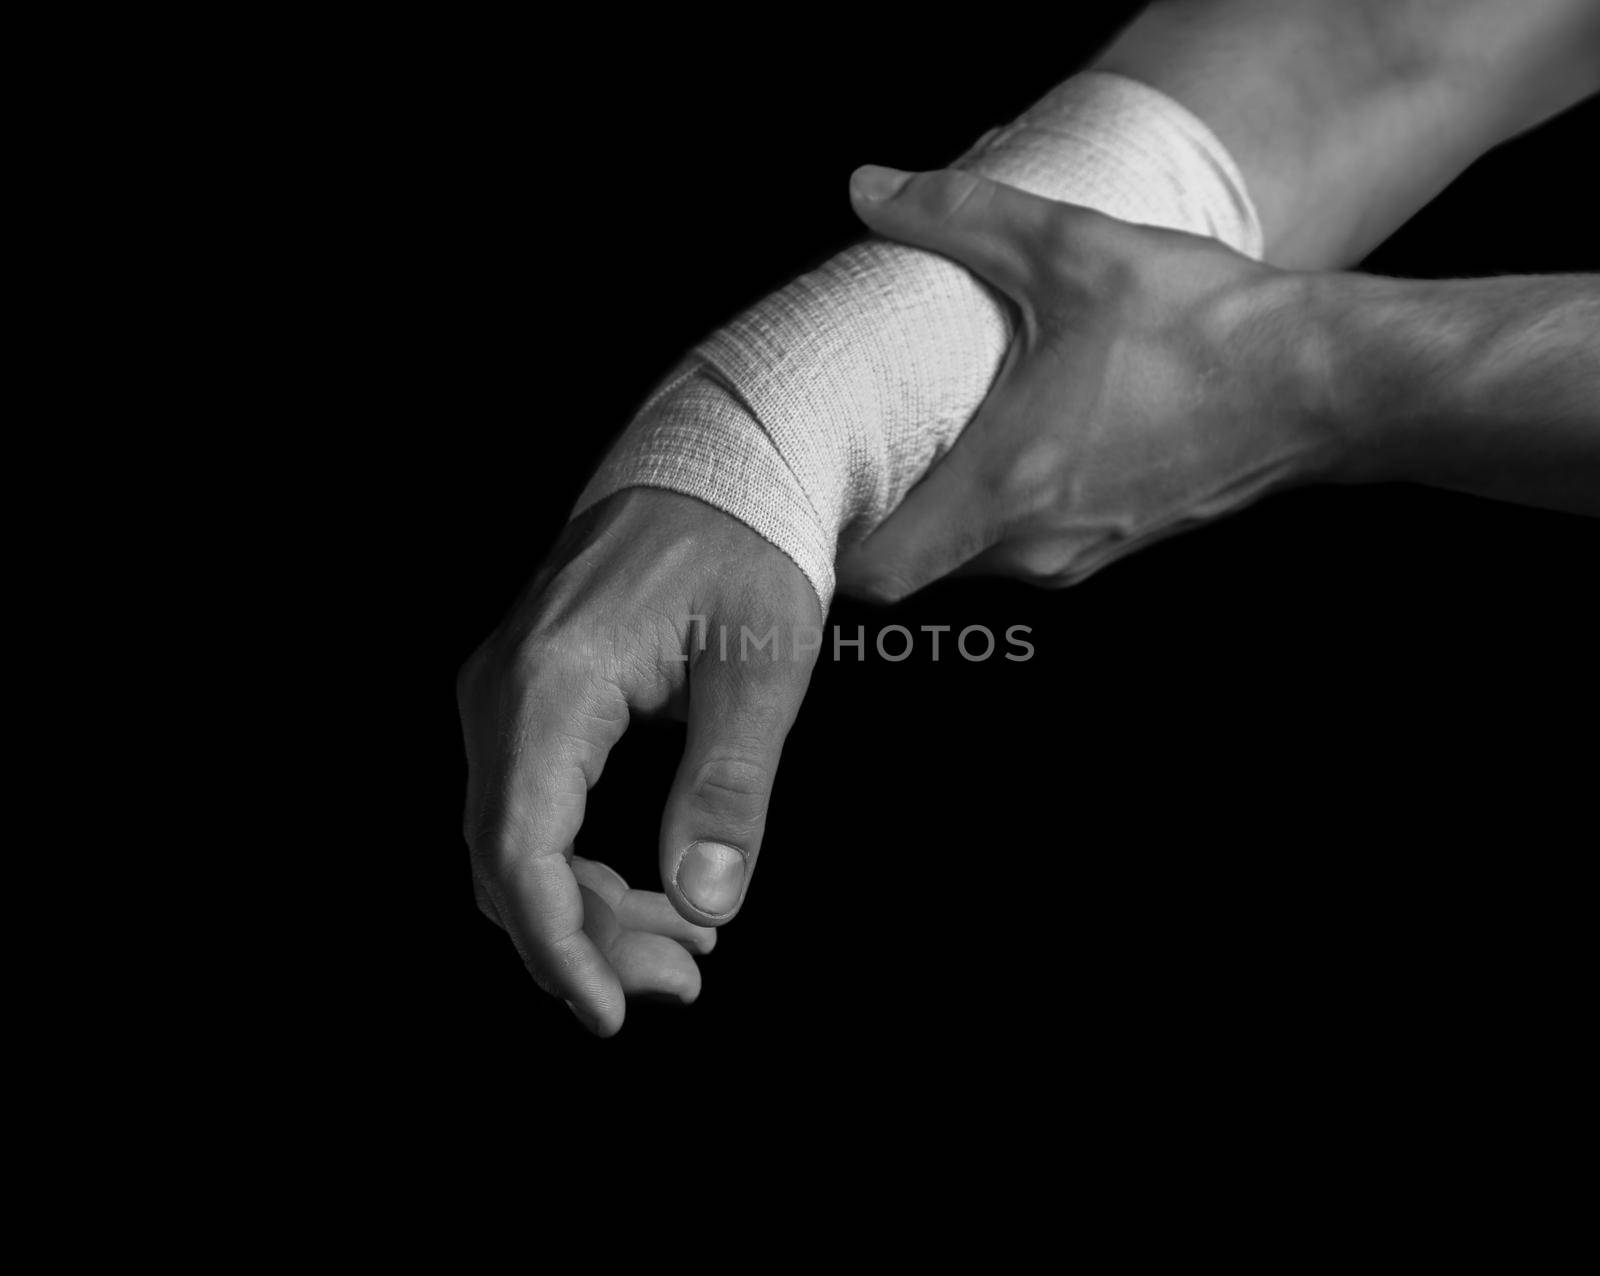 Pain in a male wrist, bandaged hand, black and white image